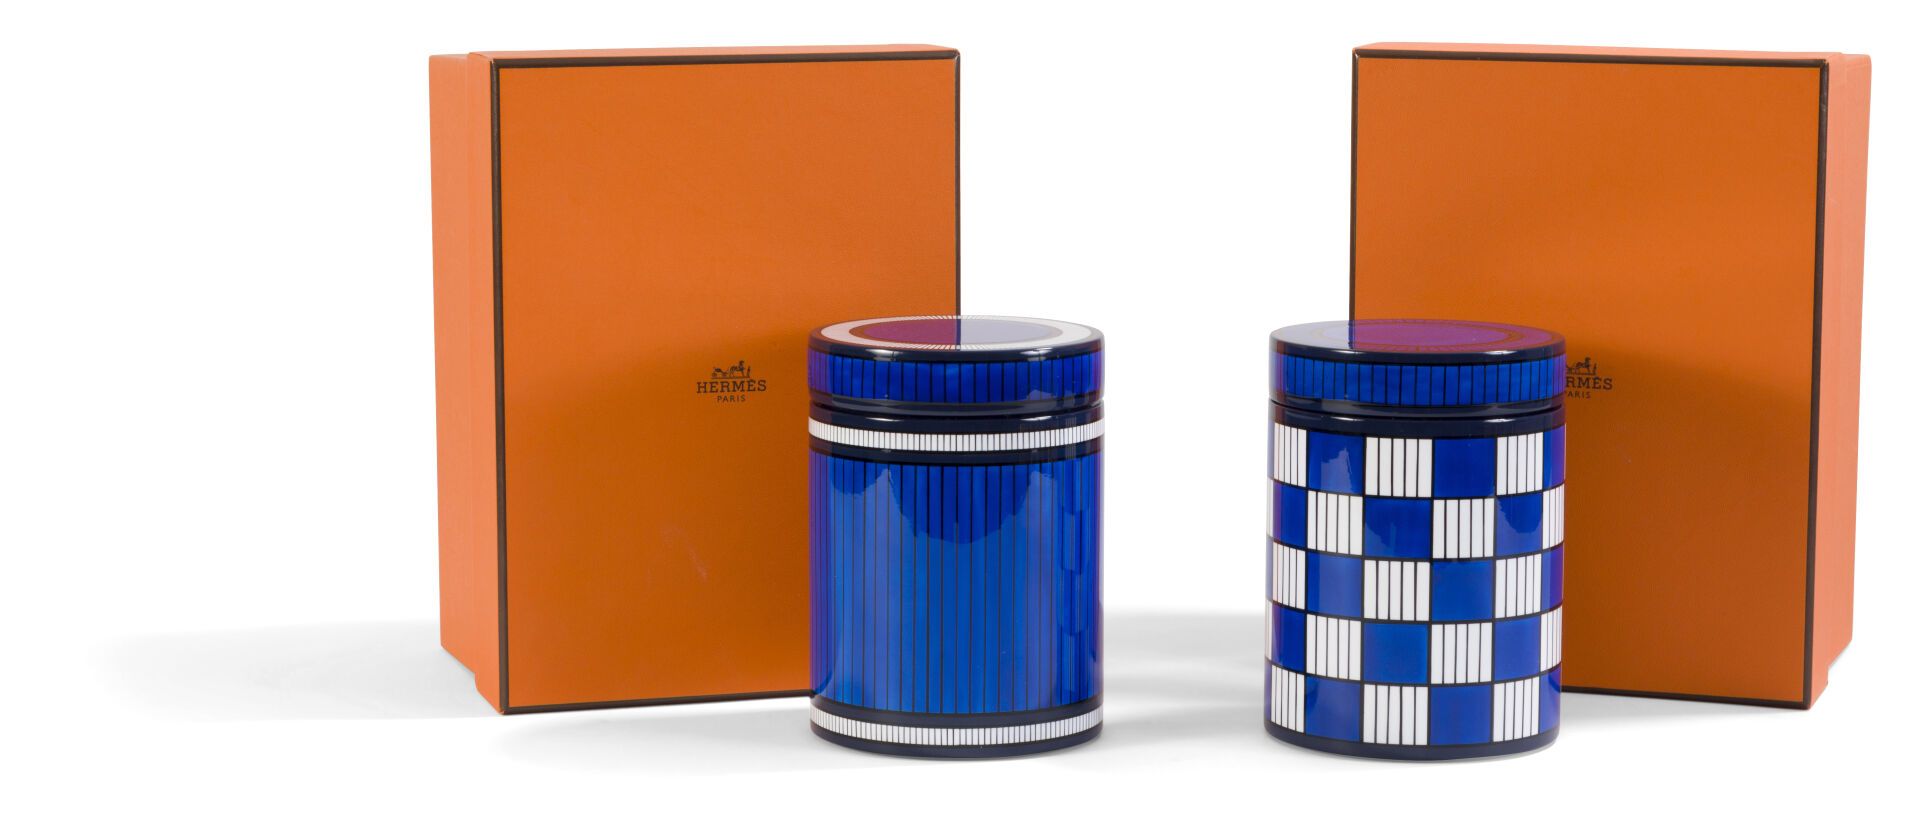 Null HERMES Paris.
Two cylindrical tea chests with blue and white lacquered geom&hellip;